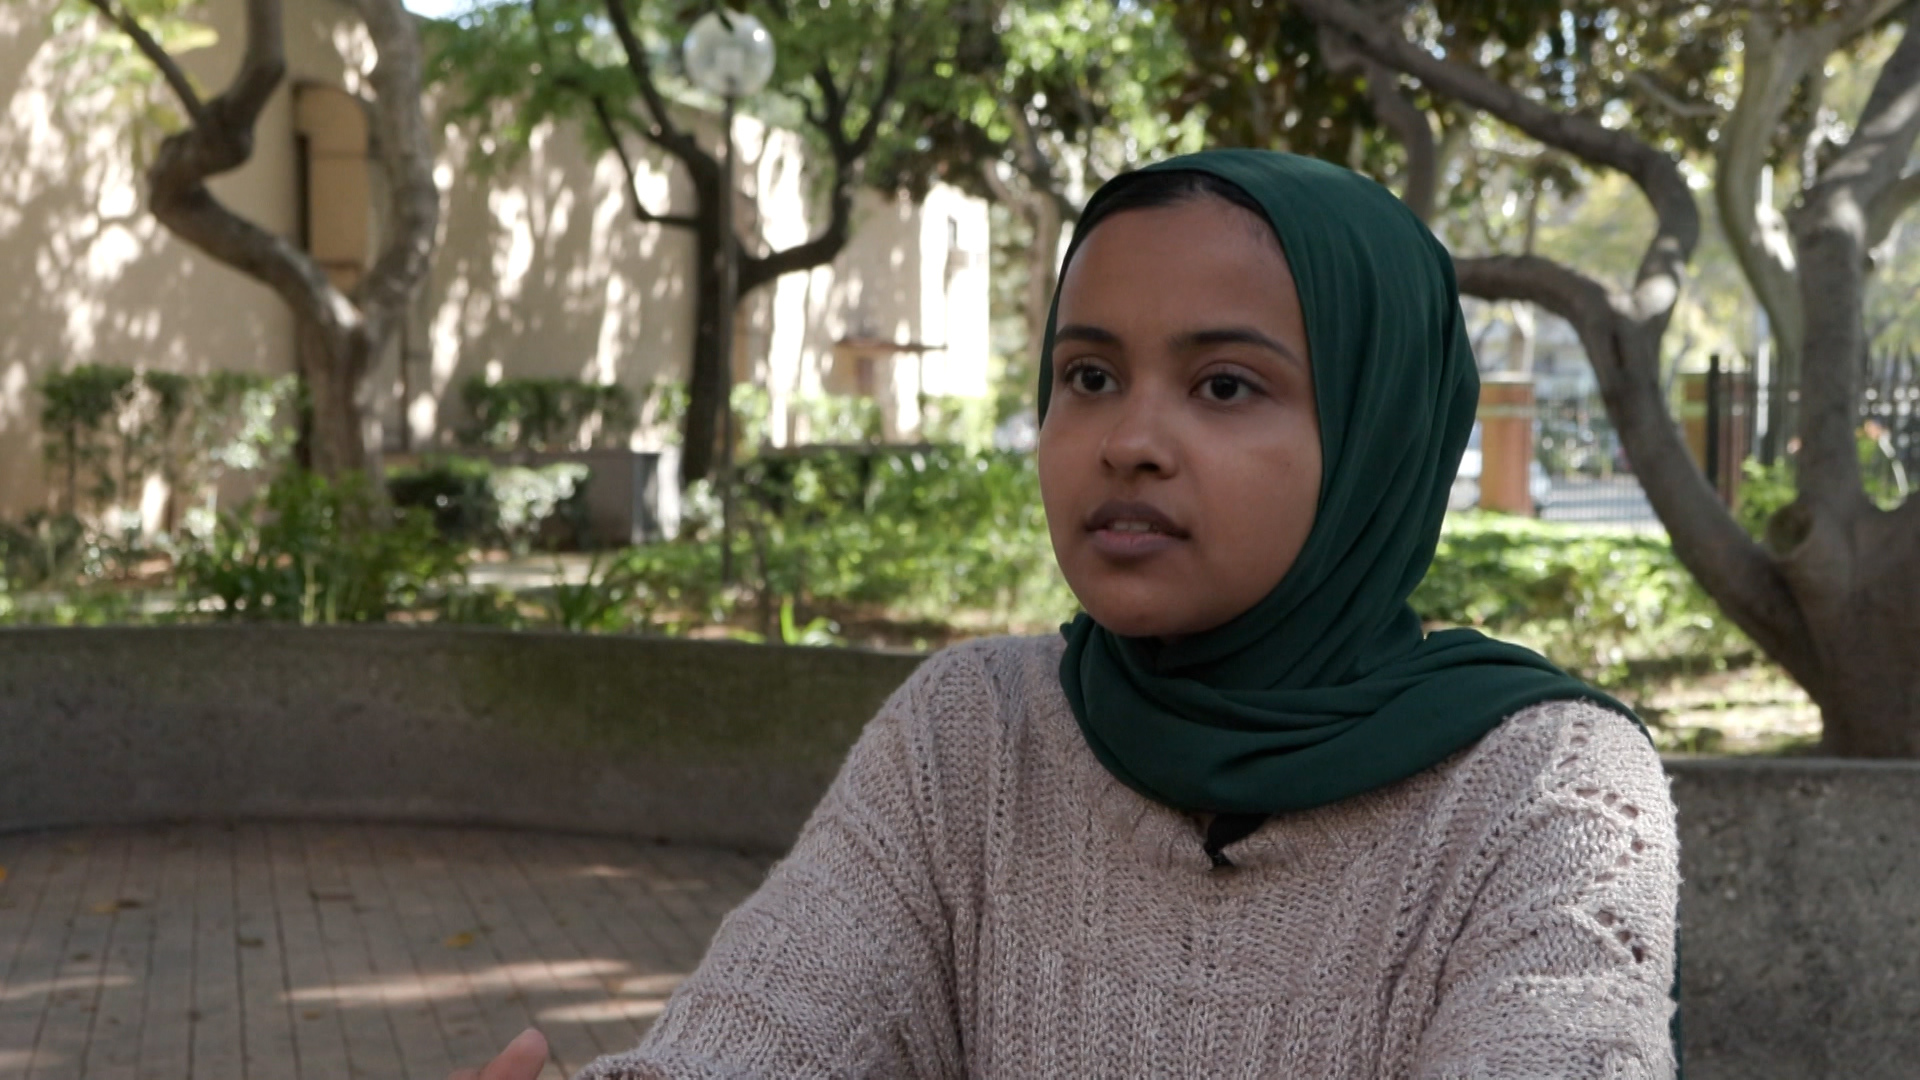 Top USC graduate cancelled over Gaza speaks out